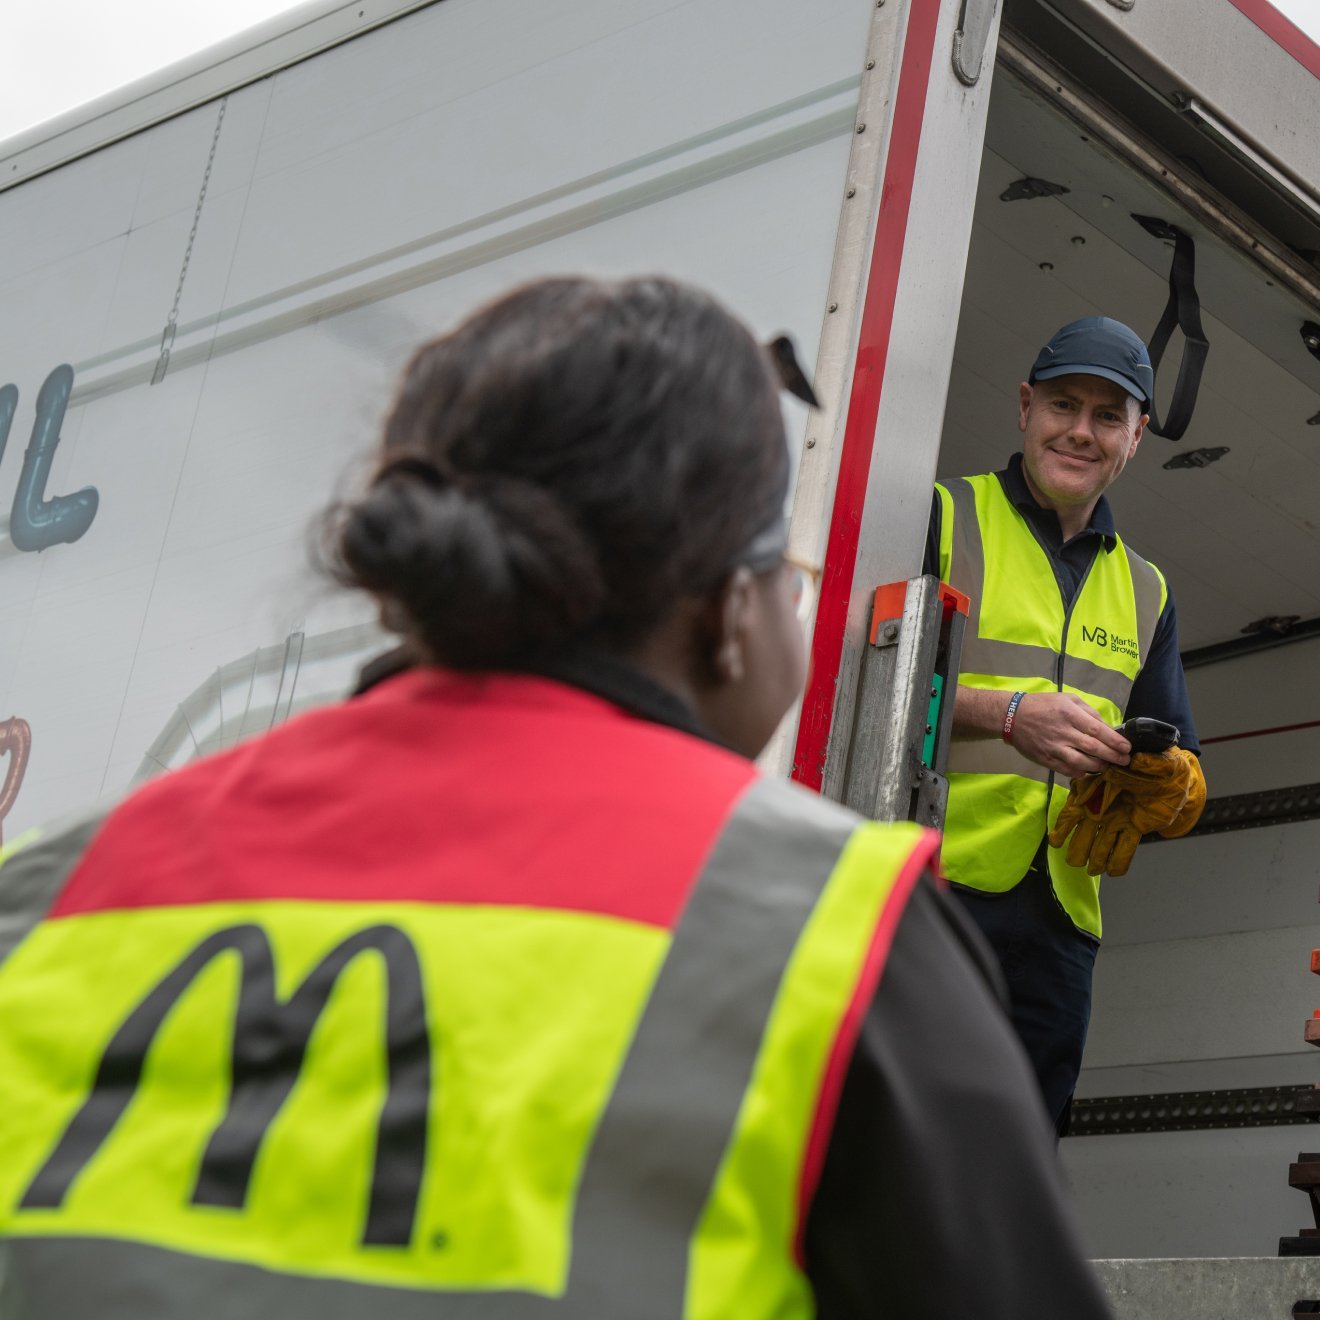 Man wearing a yellow vest standing in the back of a semi truck talking to a woman who is standing below him